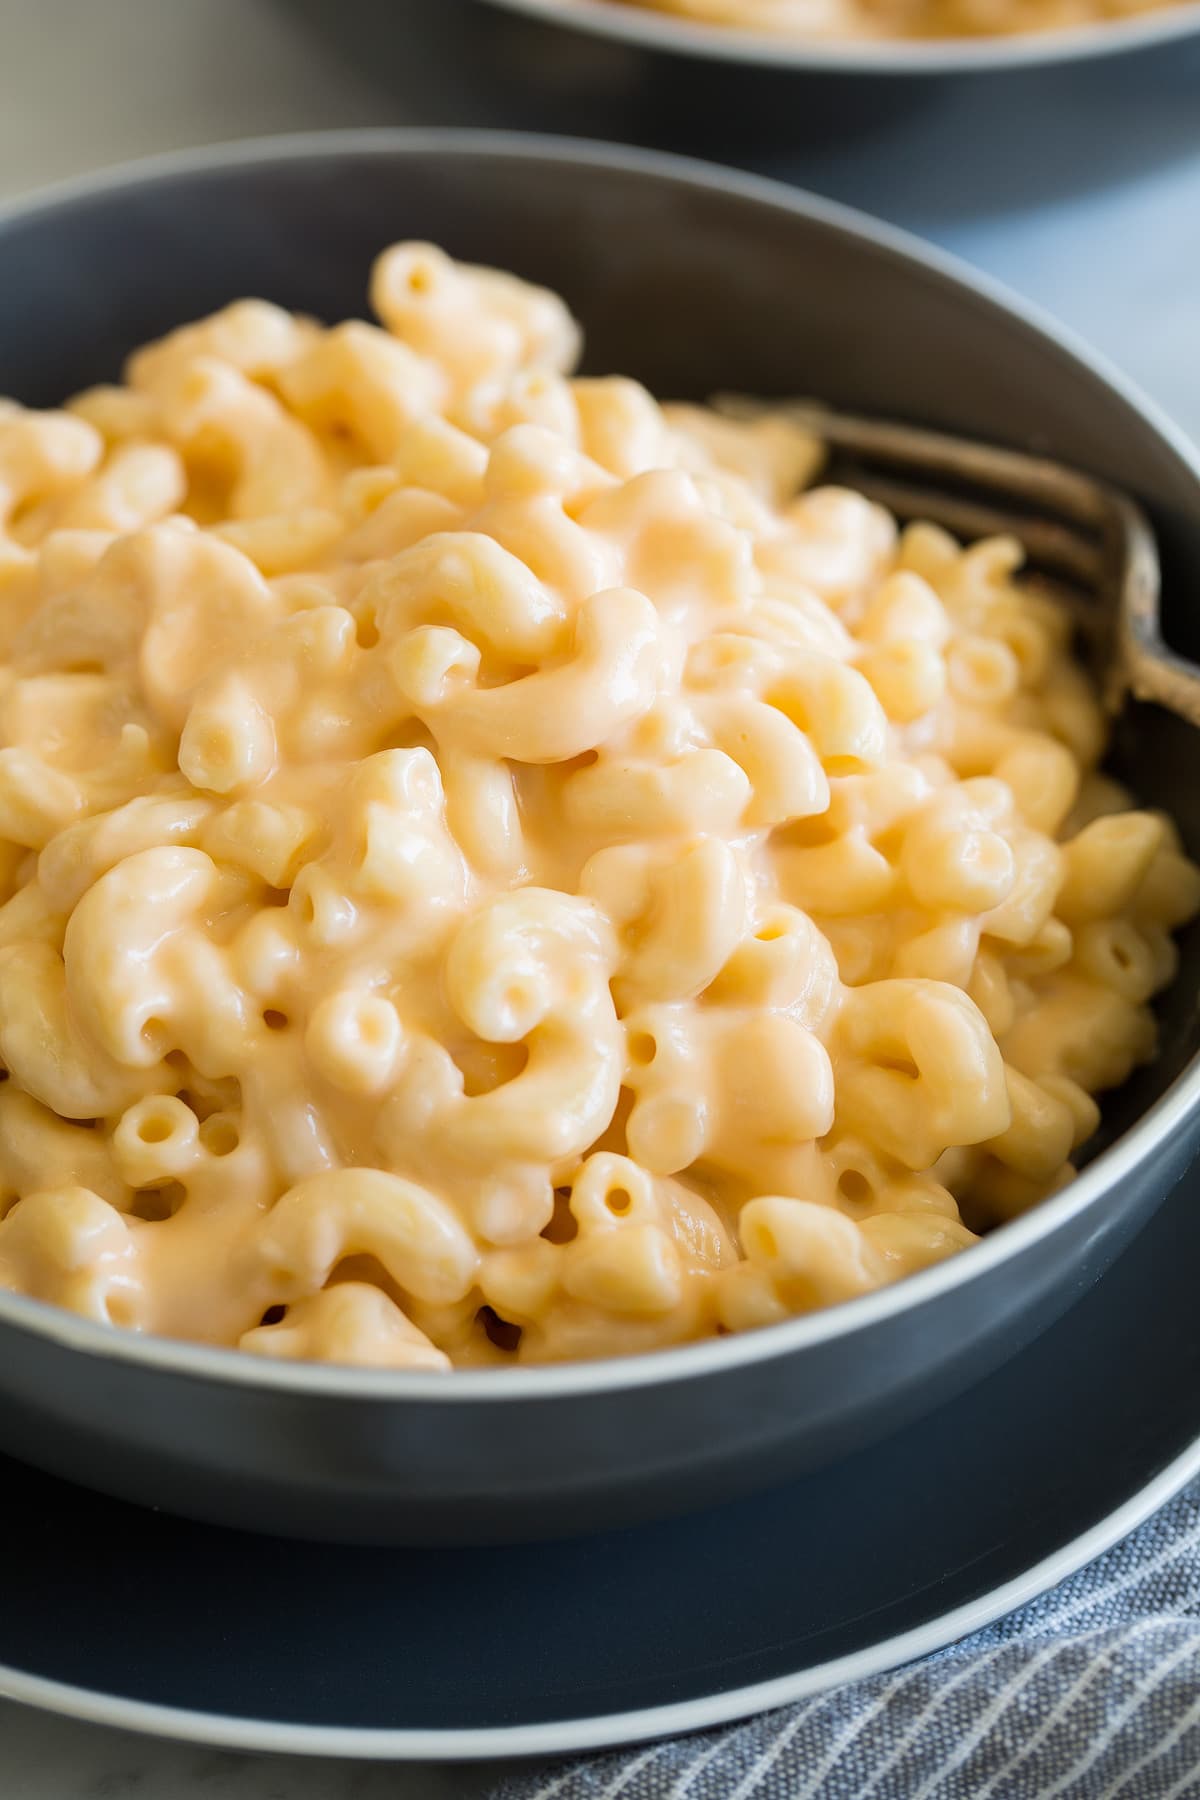 What Kind Of Cheese For Mac And Cheese